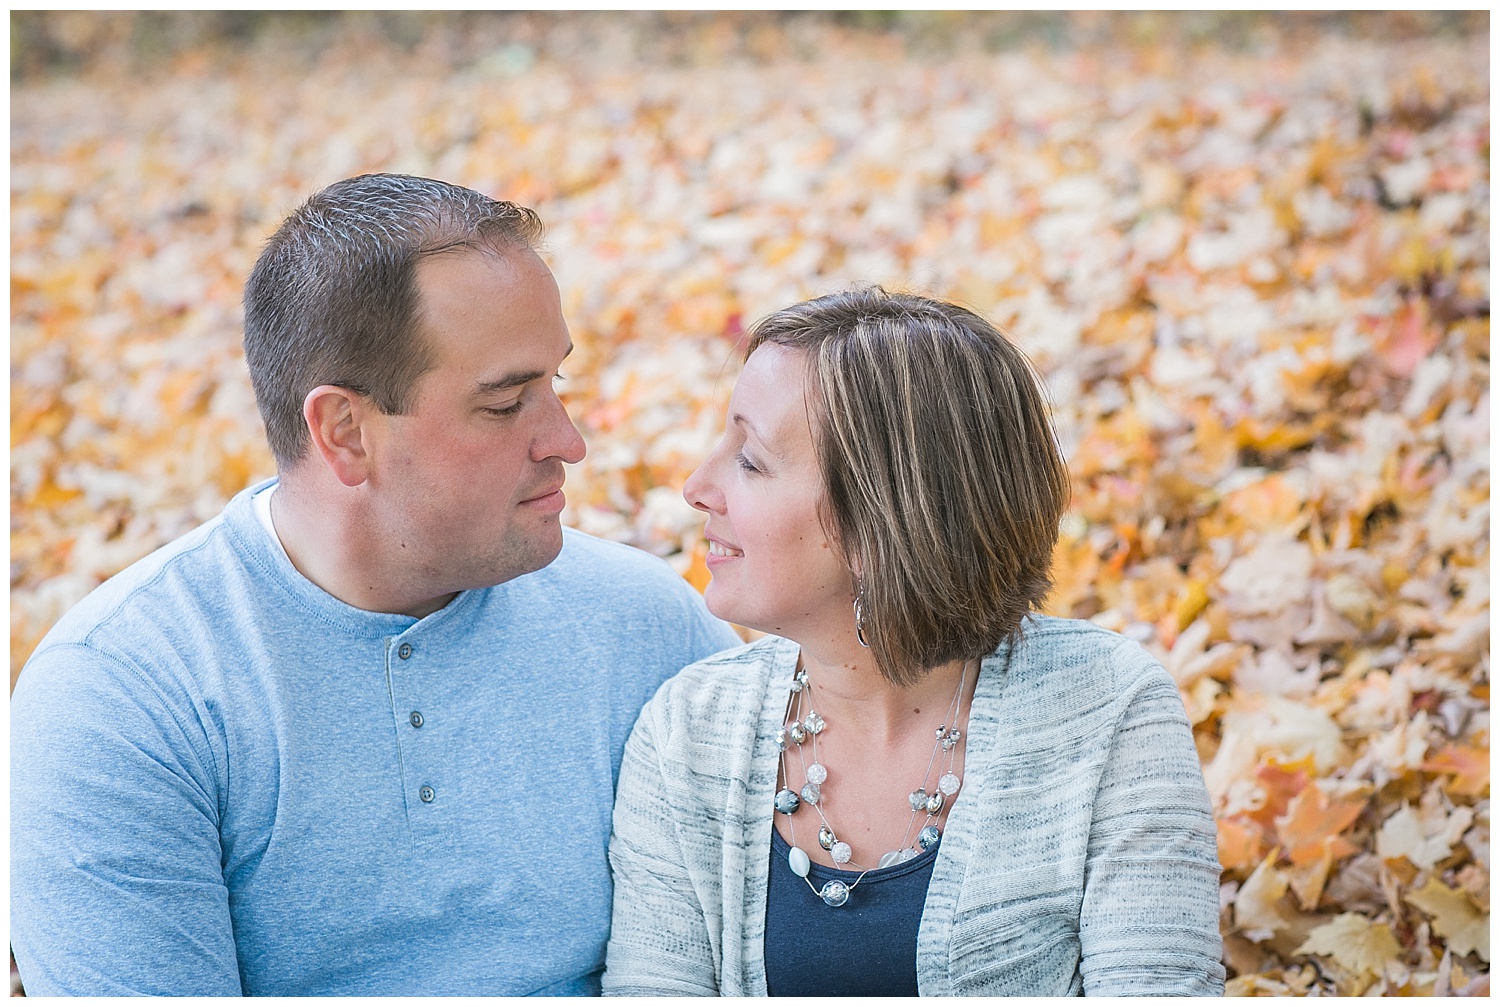 The Schurr family session at Letchworth state park - Whimsy roots photography 21.jpg